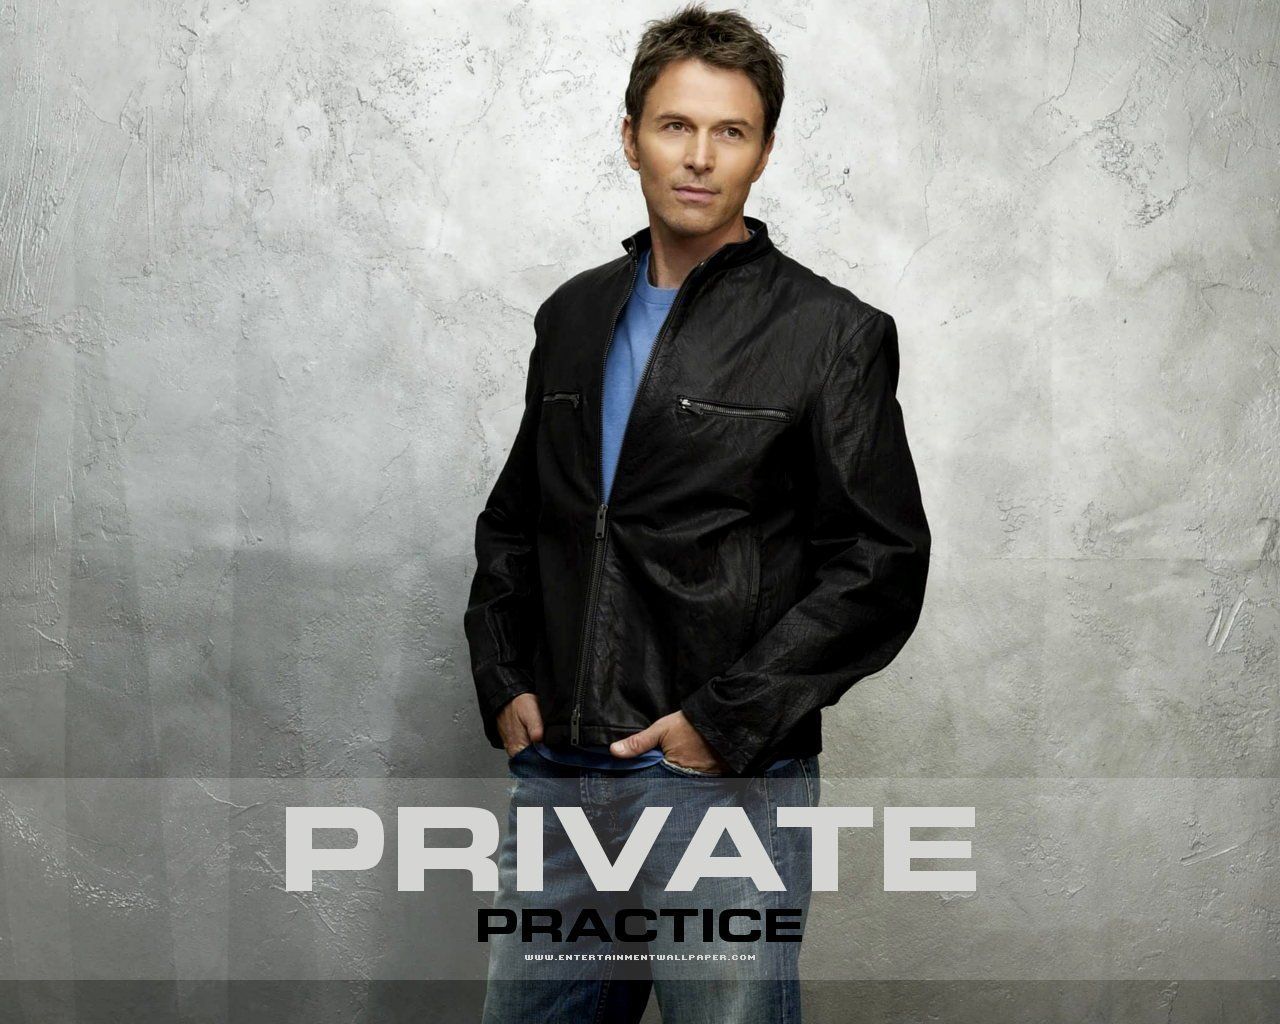 Tim Daly Wallpaper: Tim Daly. Tims, Private practice, Wallpaper